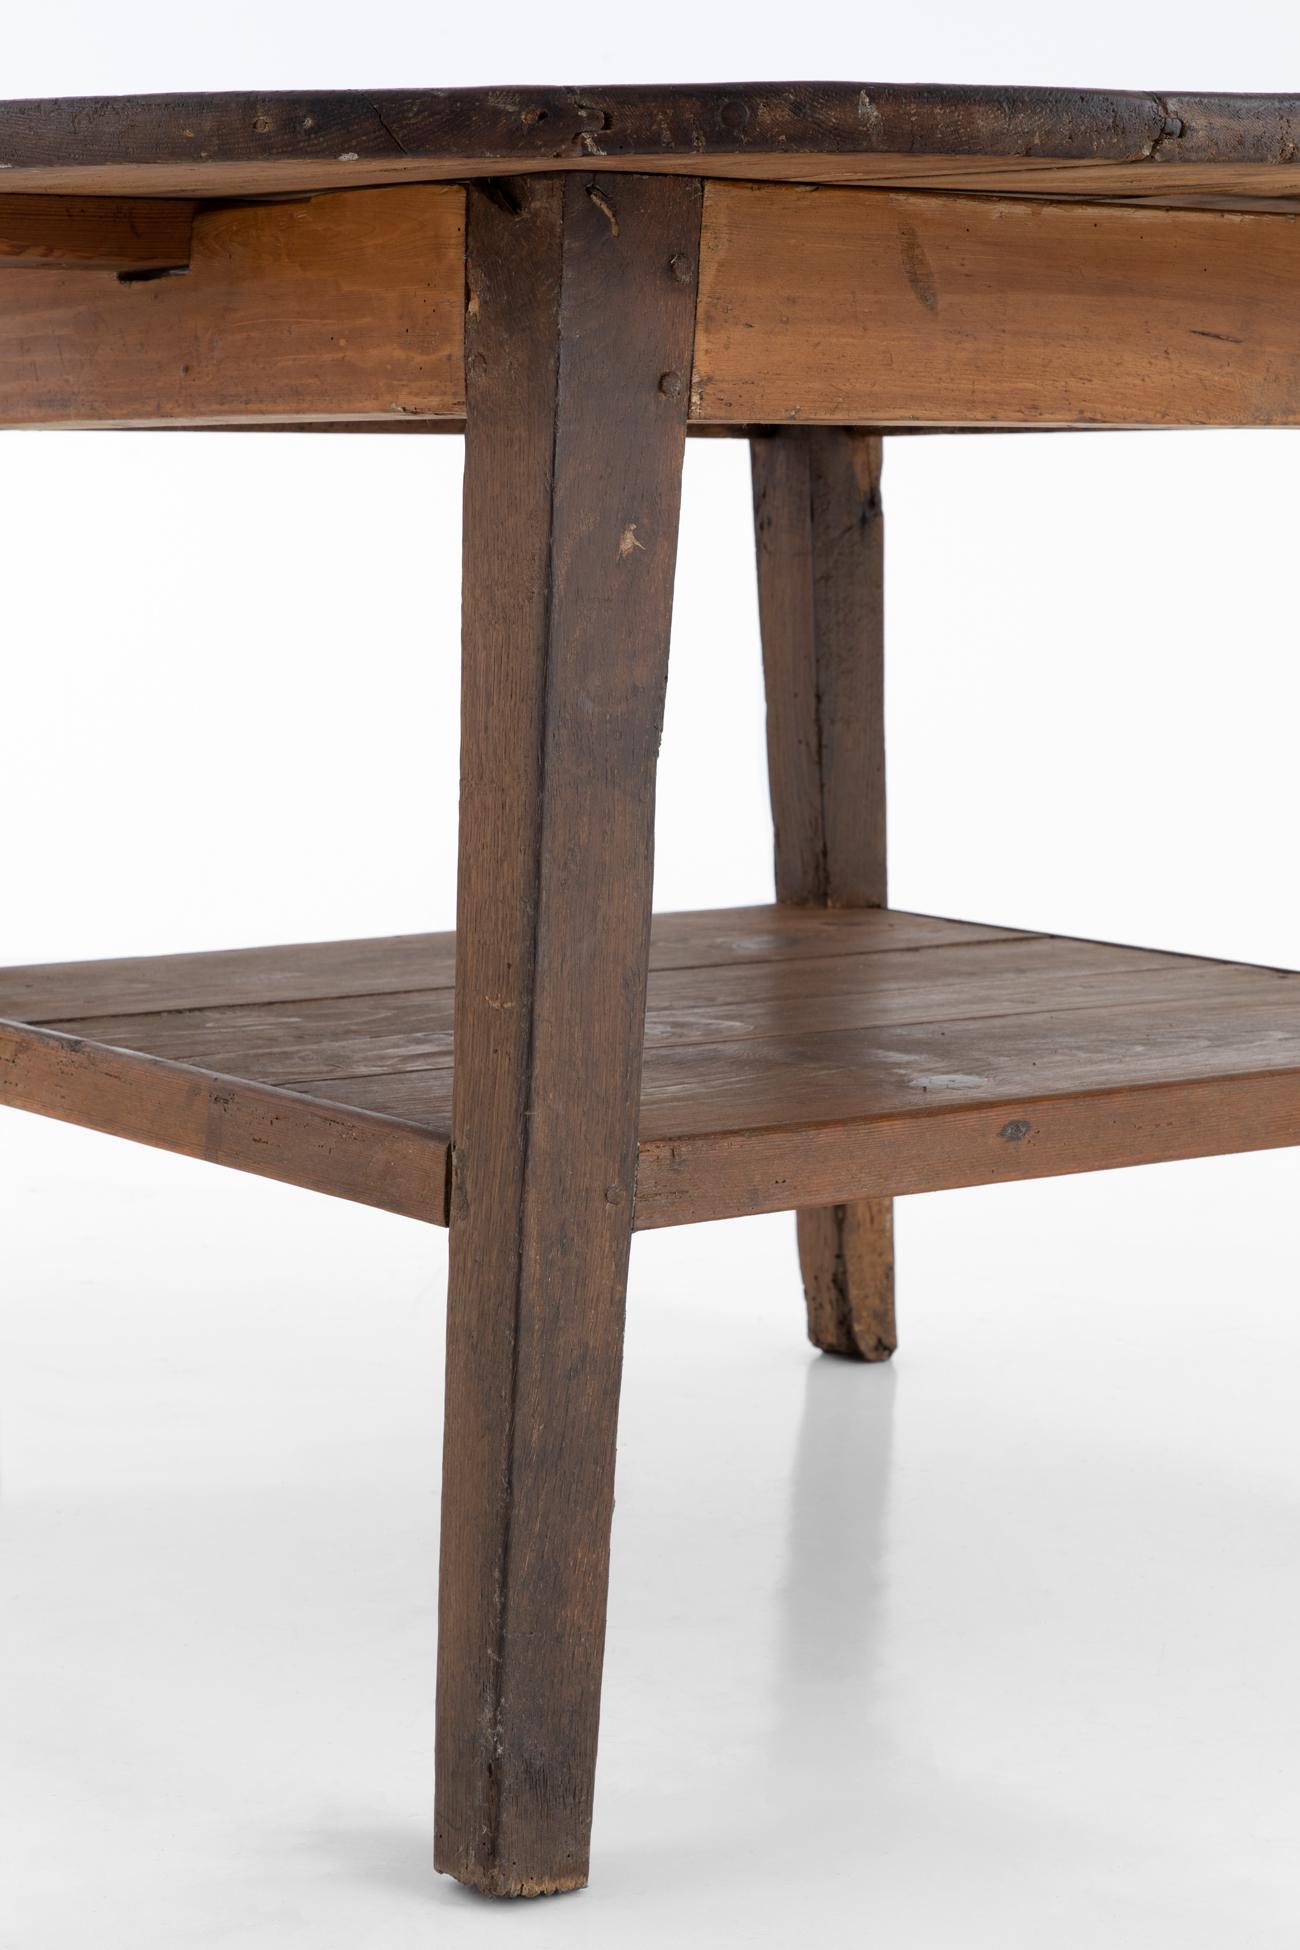 Pine Provincial French Farmhouse Side Table with Legs in Beech, circa 1900